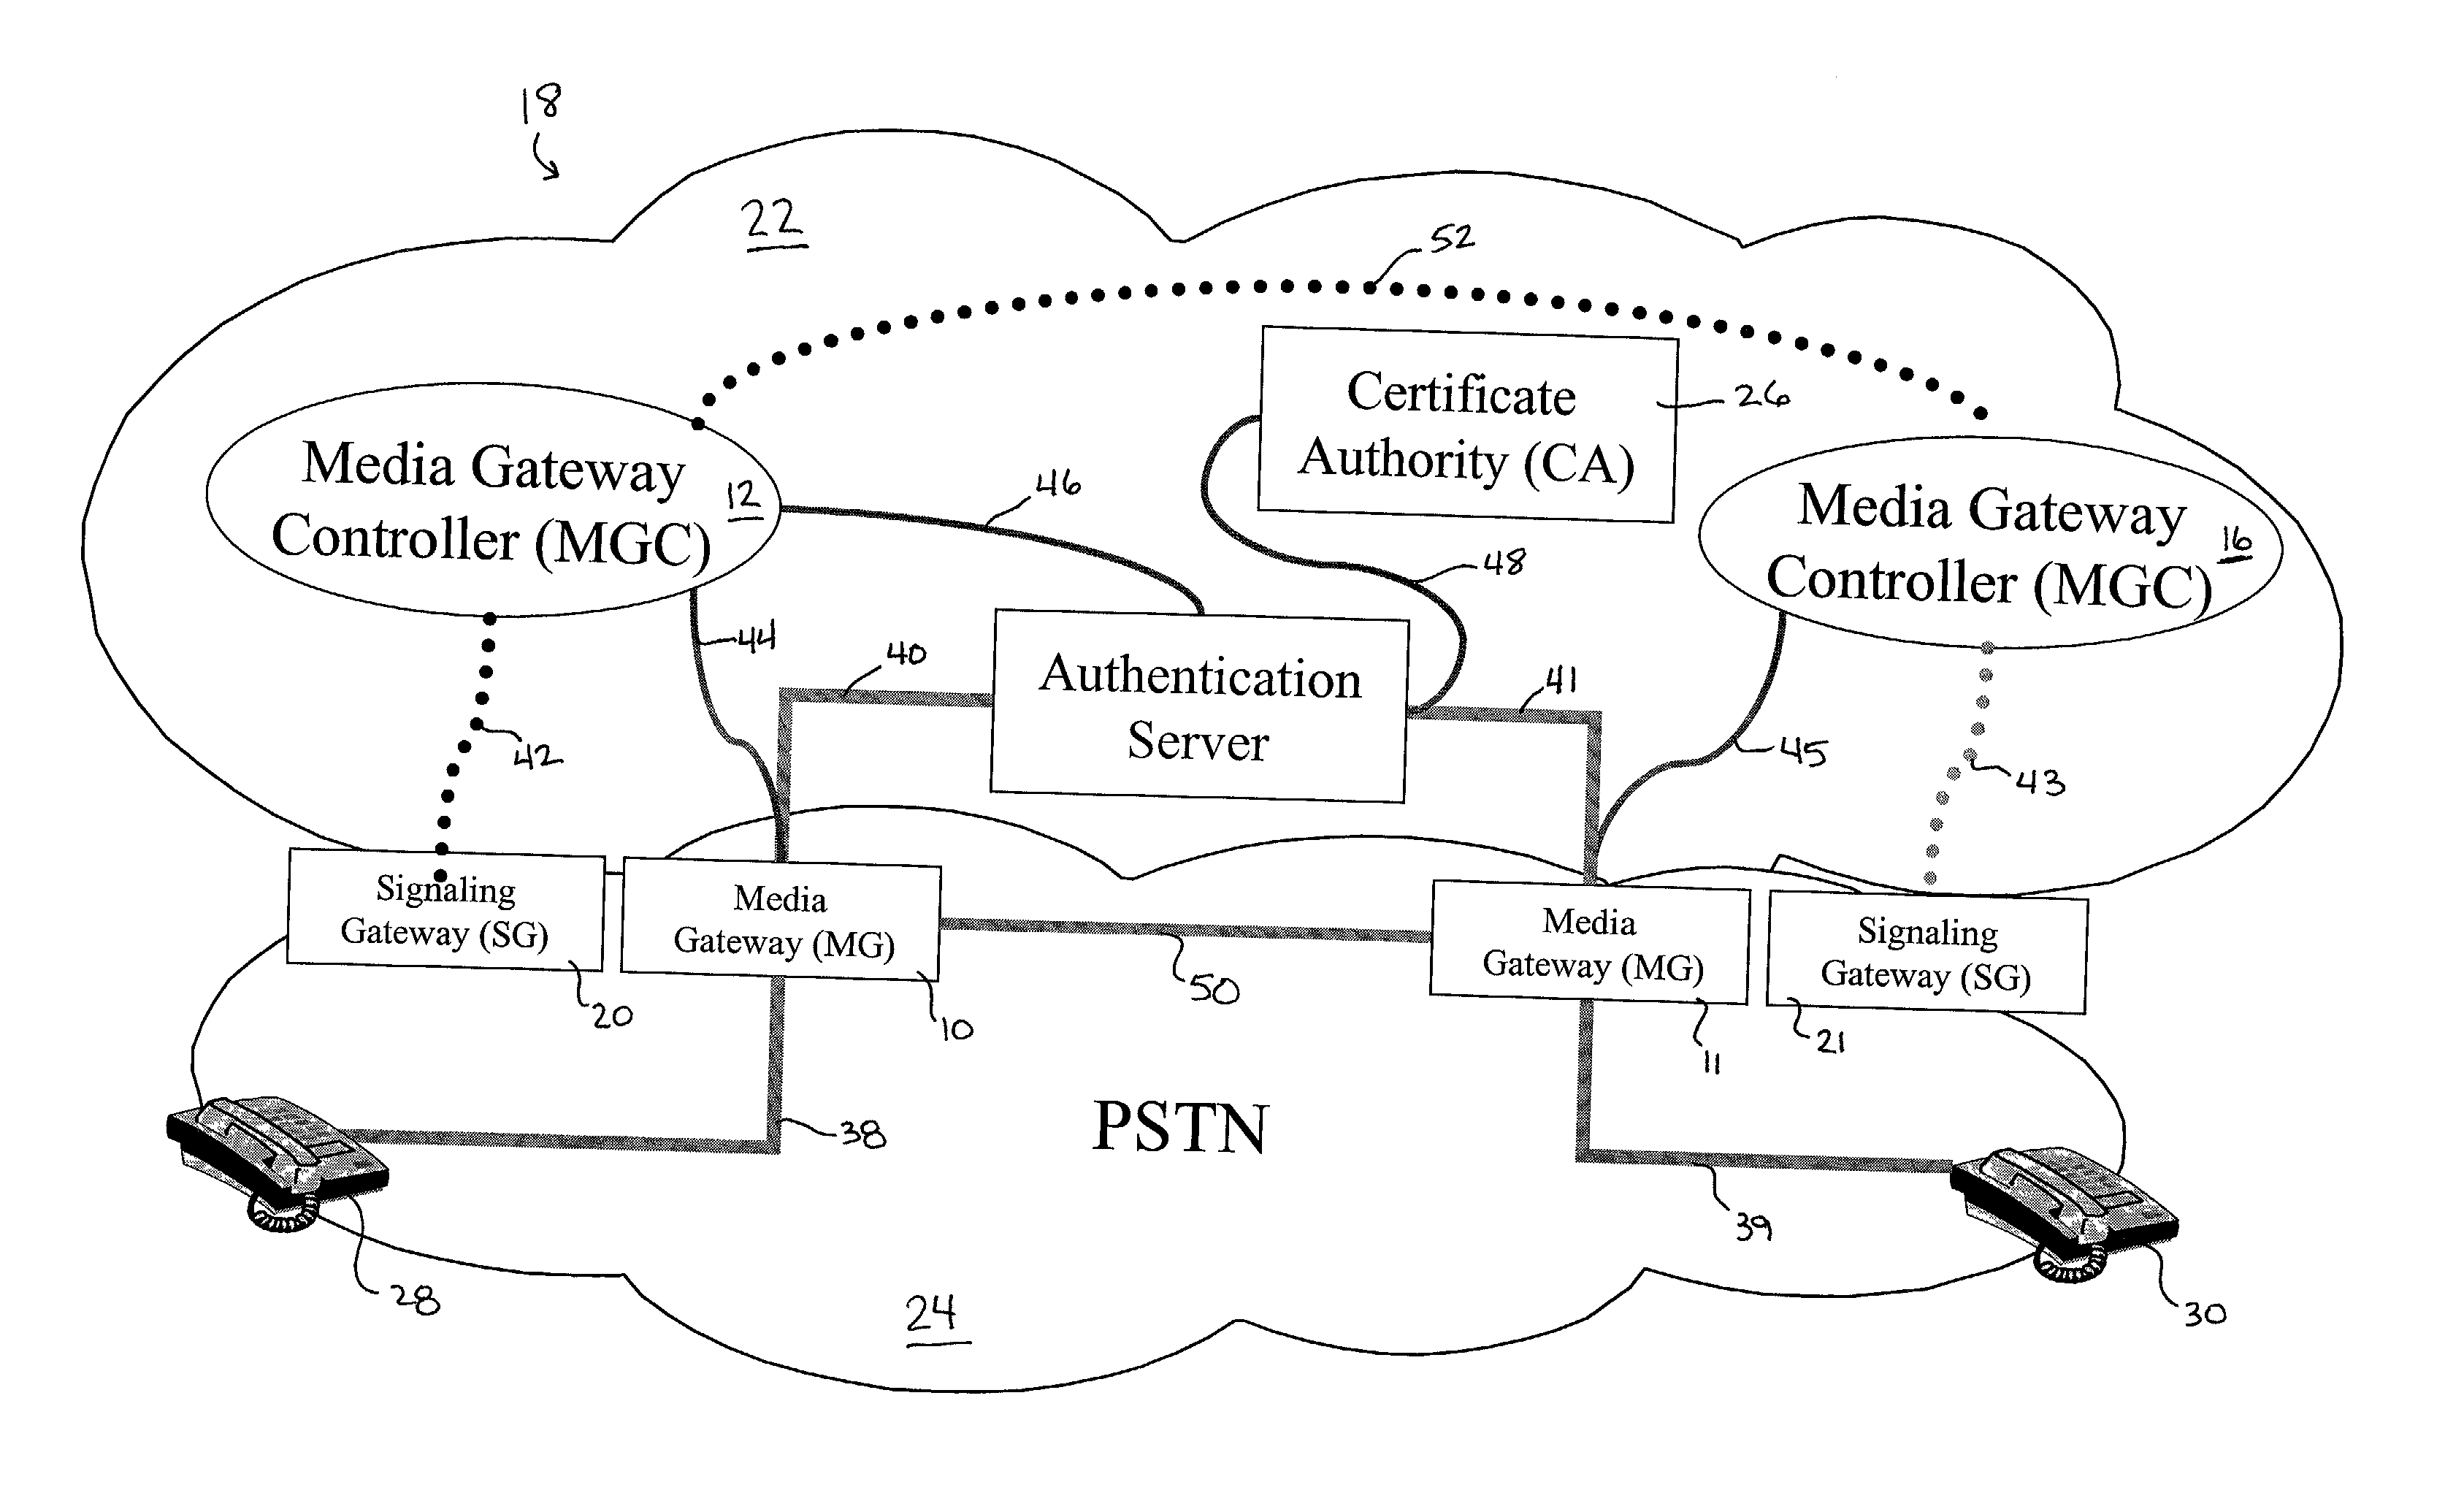 System and method for providing authentication and verification services in an enhanced media gateway